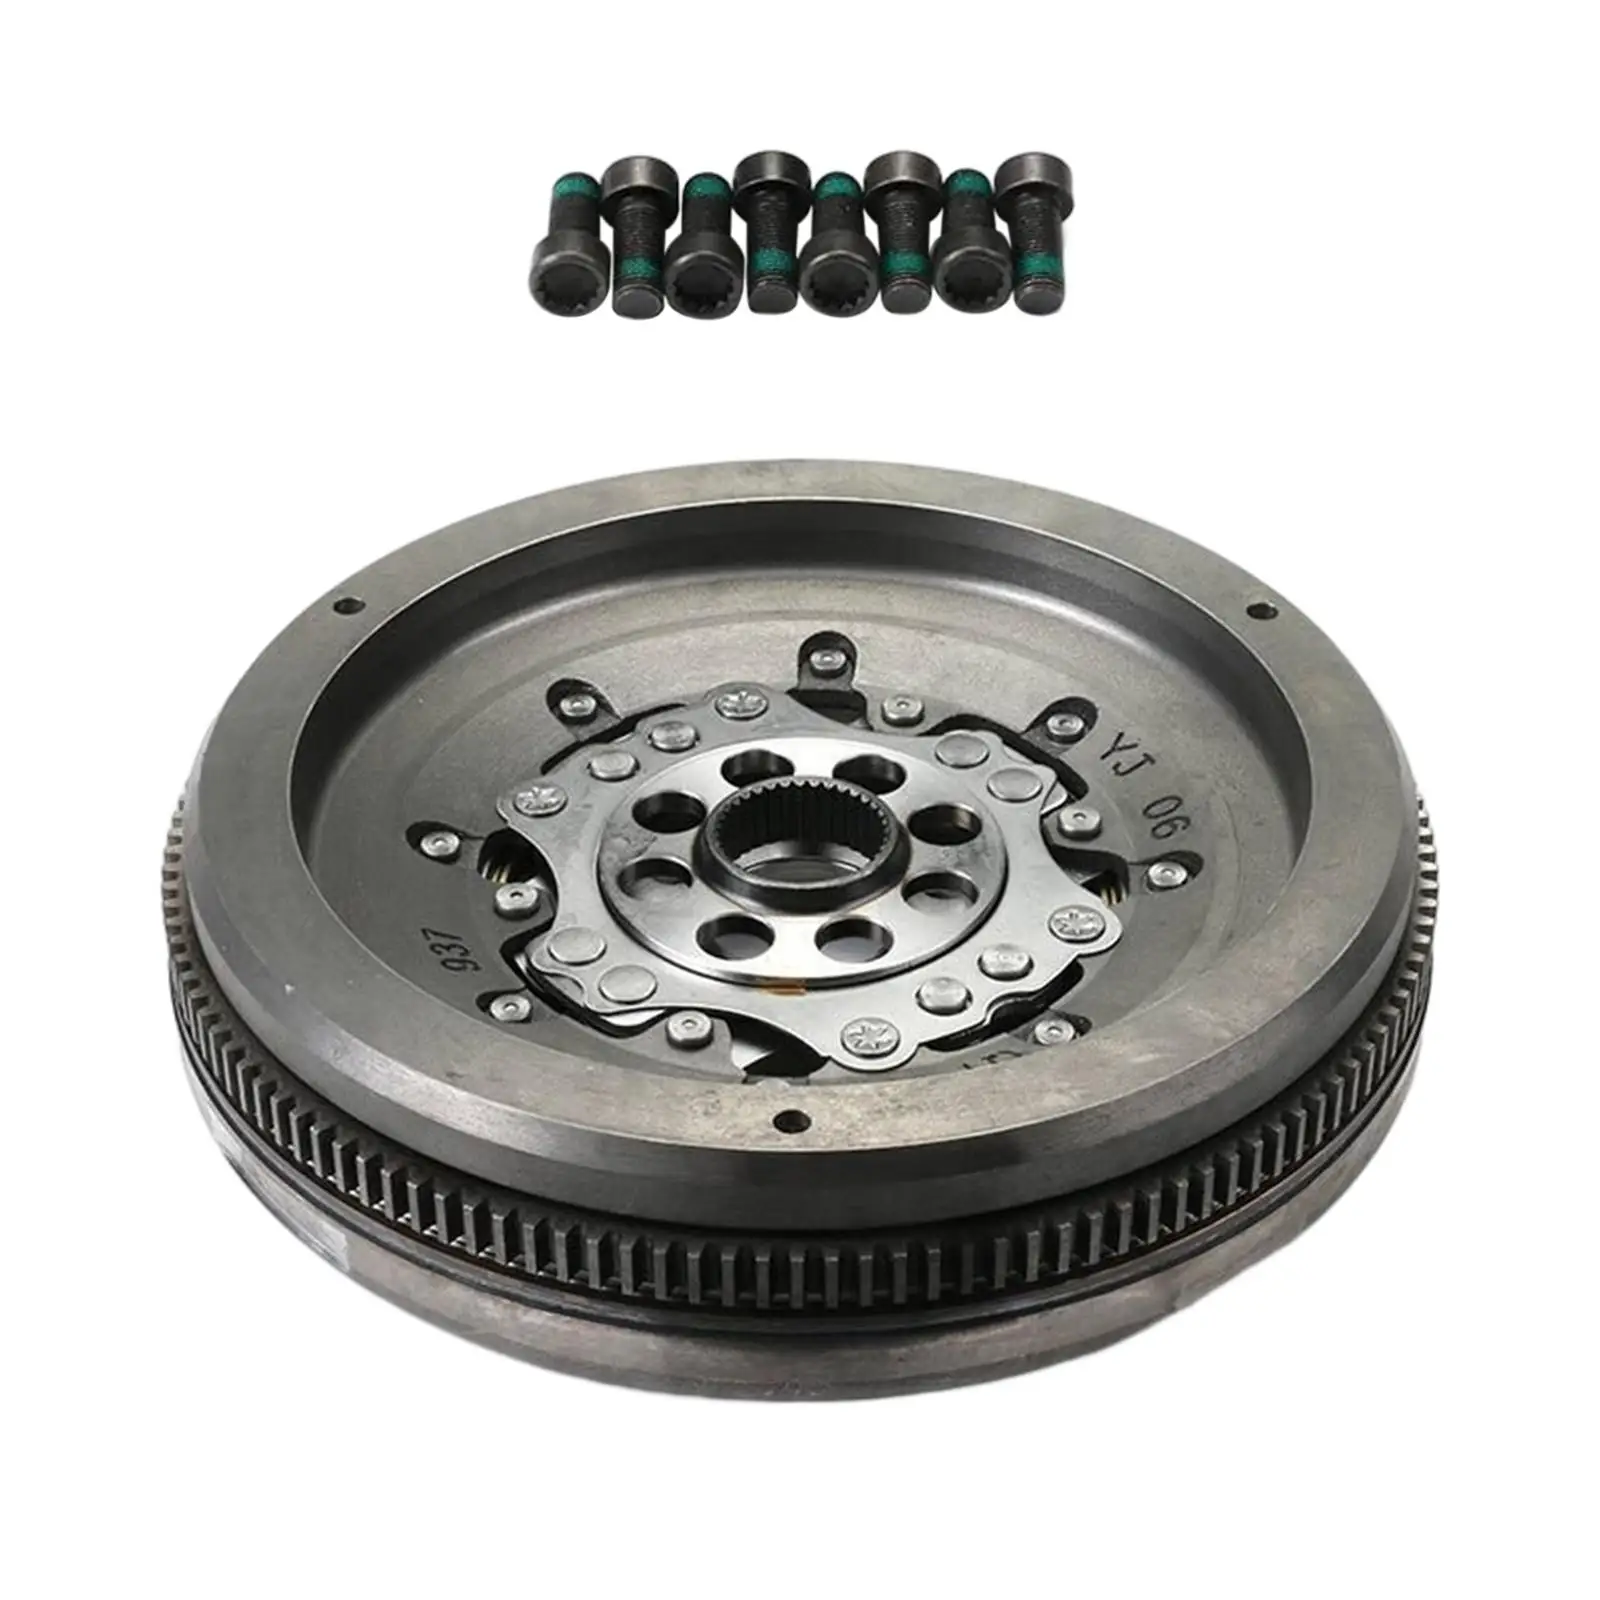 Transmission Flywheel 02E Dq250 for Audi High Performance Replace Parts